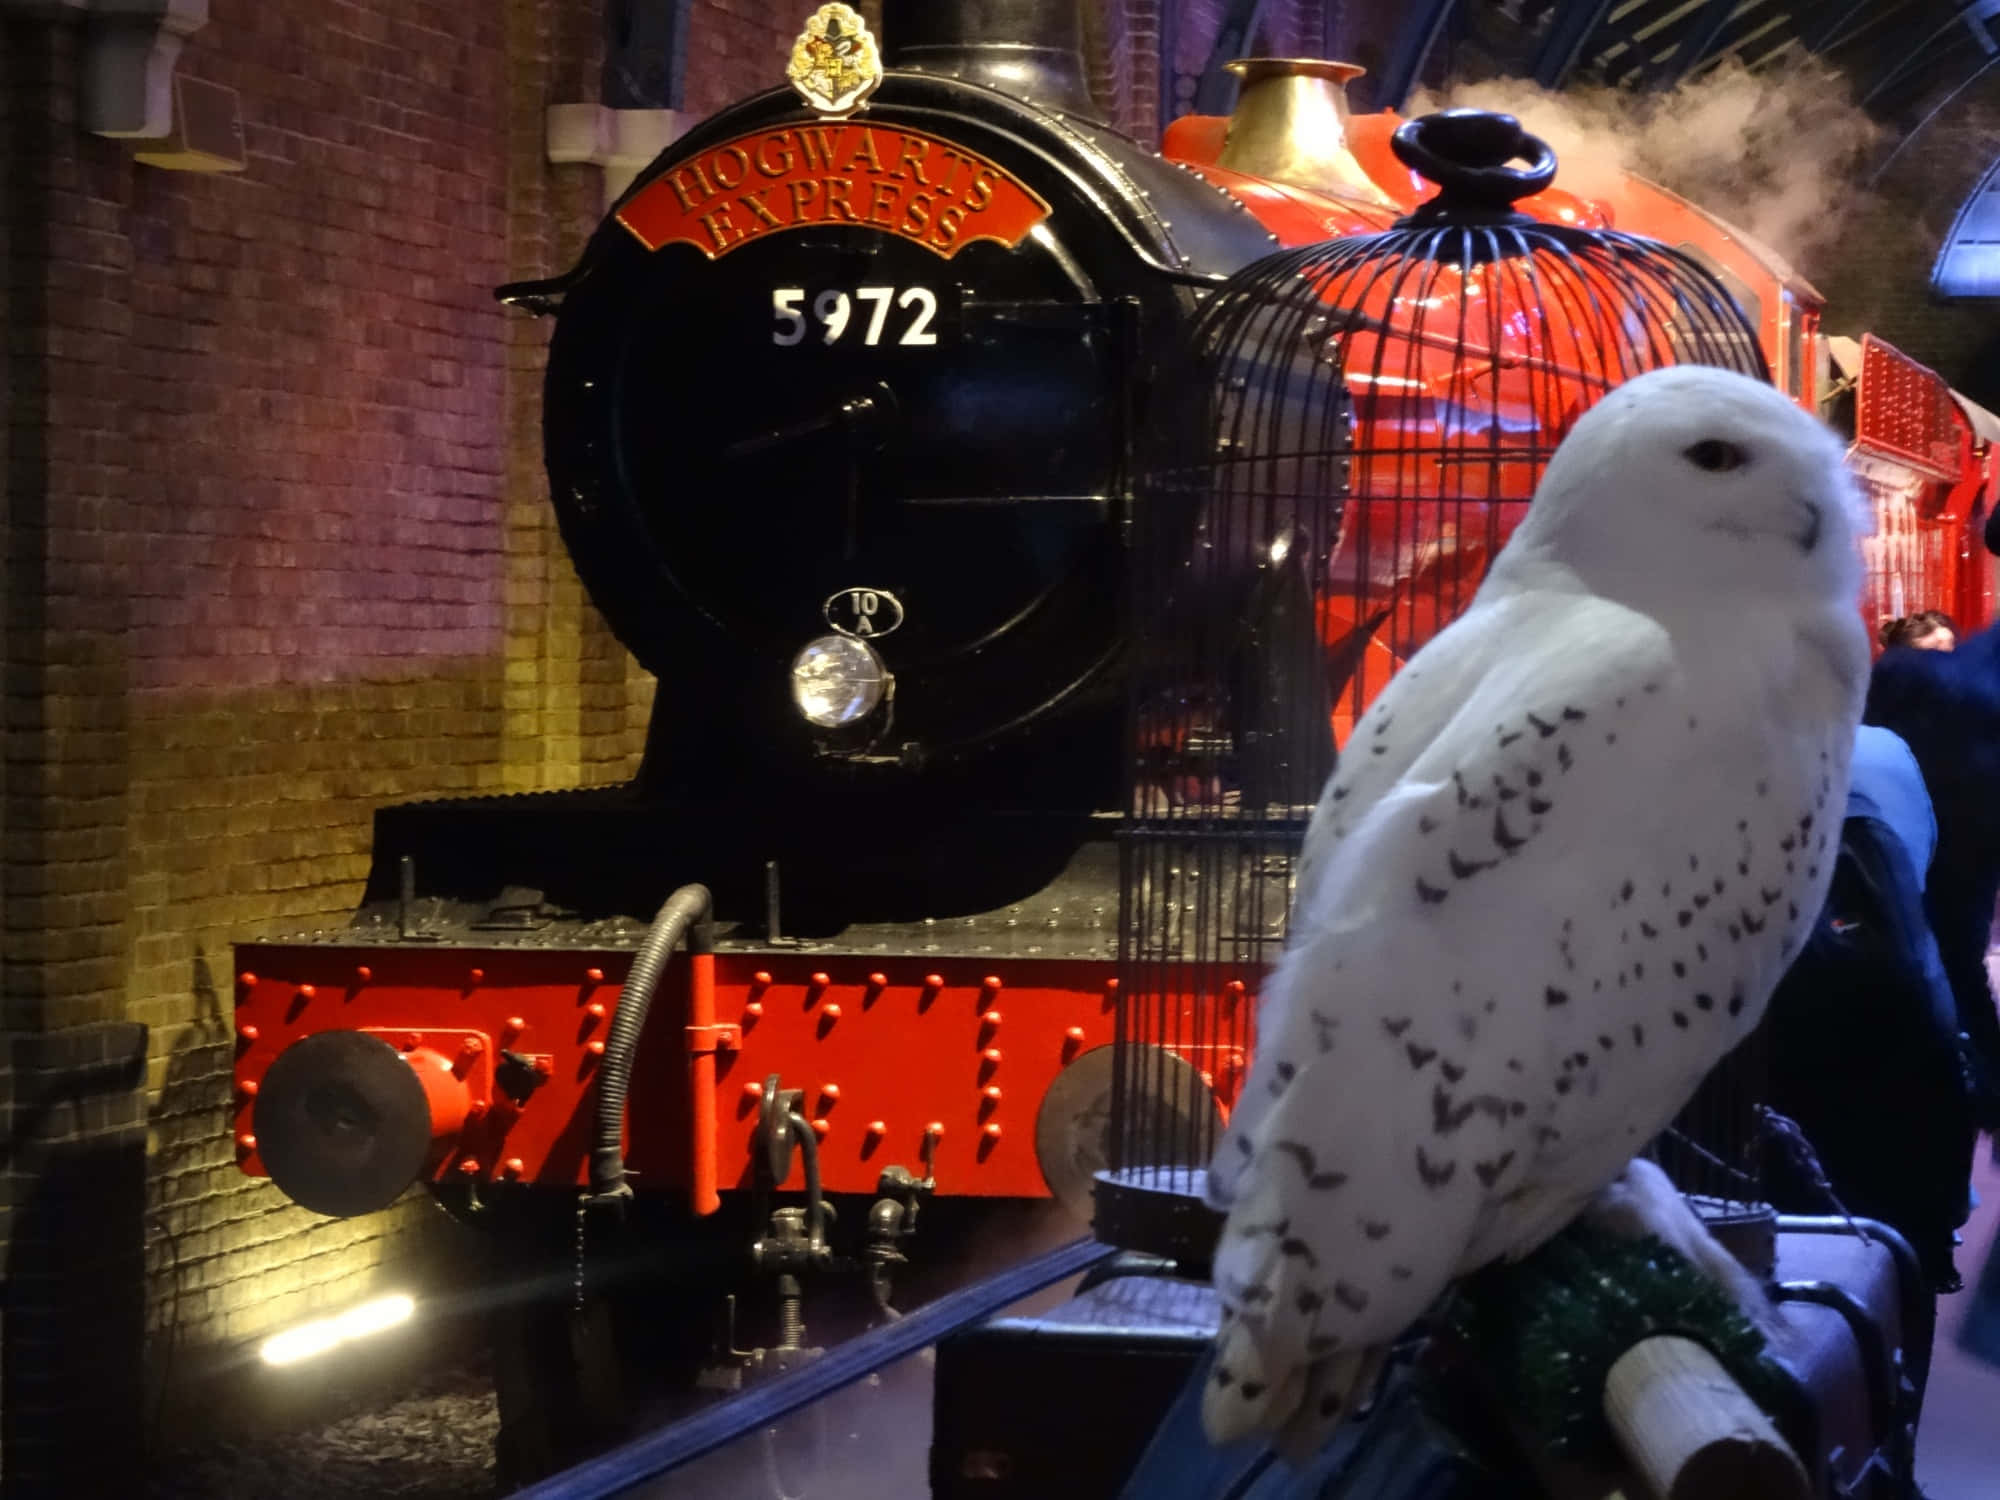 All aboard the iconic Hogwarts Express Train! Wallpaper